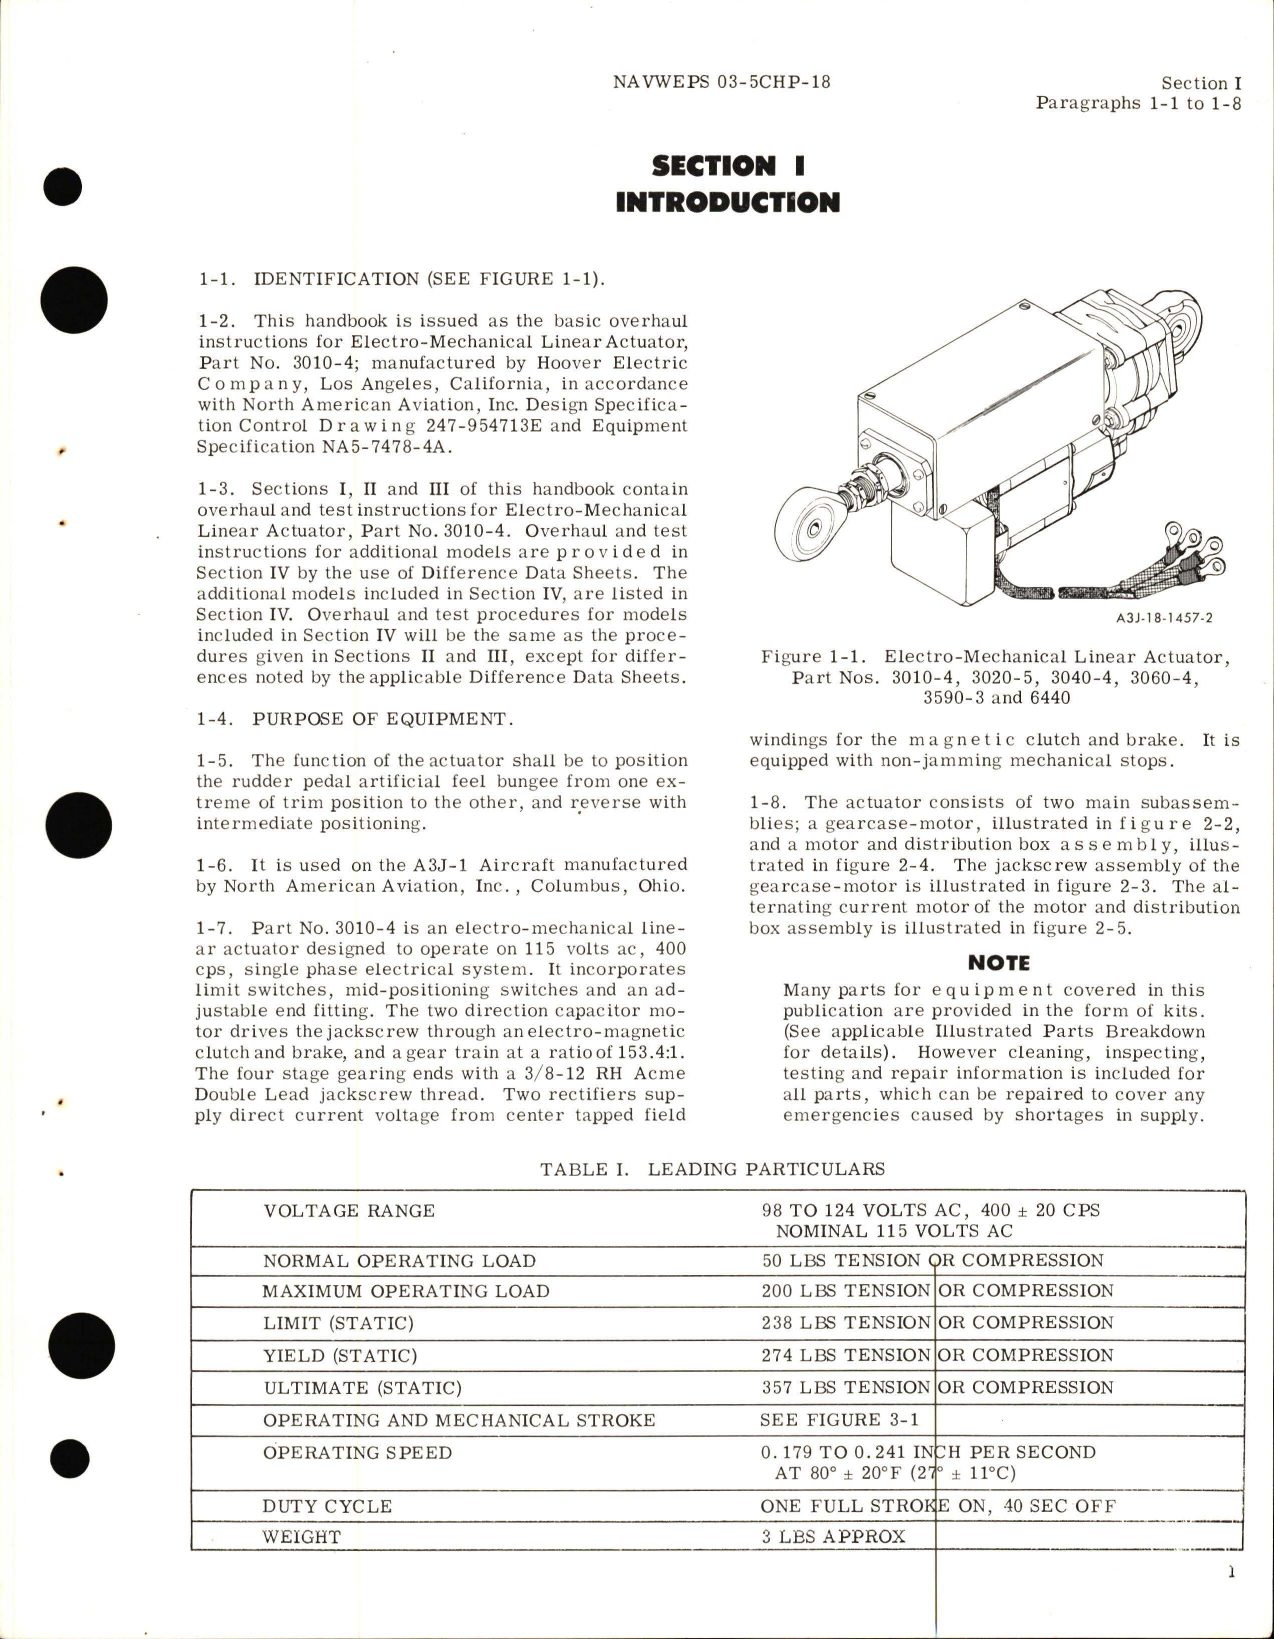 Sample page 5 from AirCorps Library document: Overhaul Instructions for Electro-Mechanical Linear Actuator 3010-4, 3020-5, 3040-4, 3060-4, 3590-3, and 6440